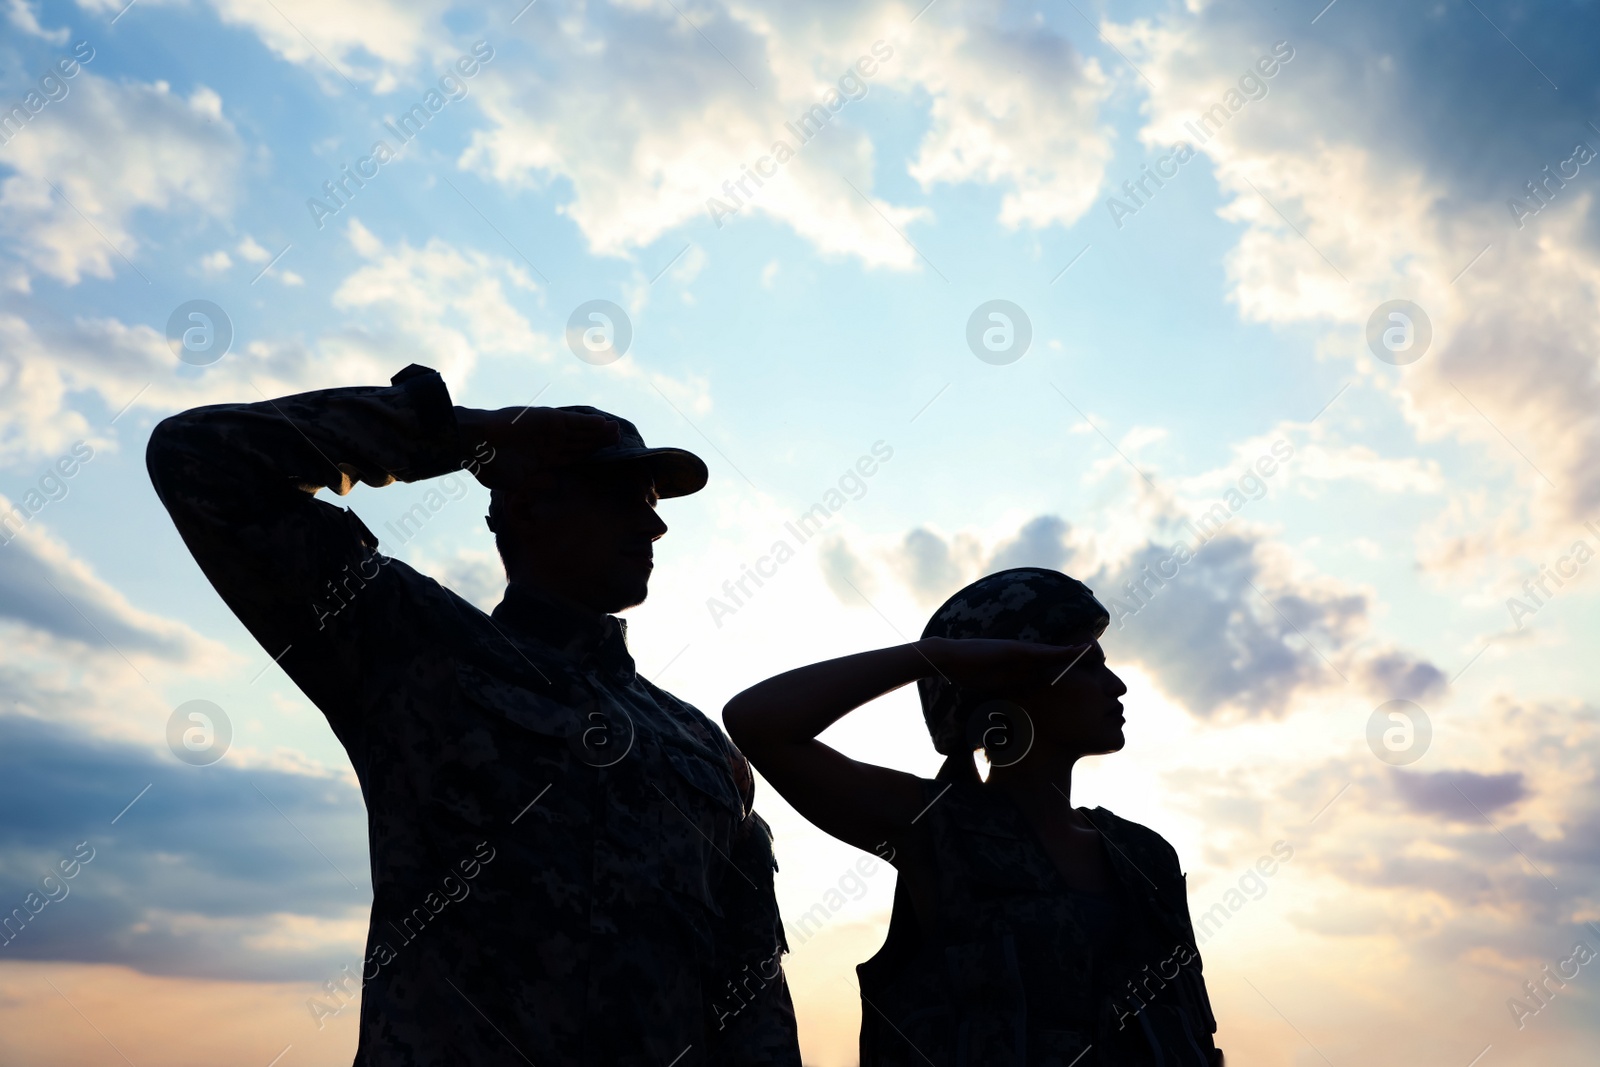 Photo of Soldiers in uniform saluting outdoors. Military service